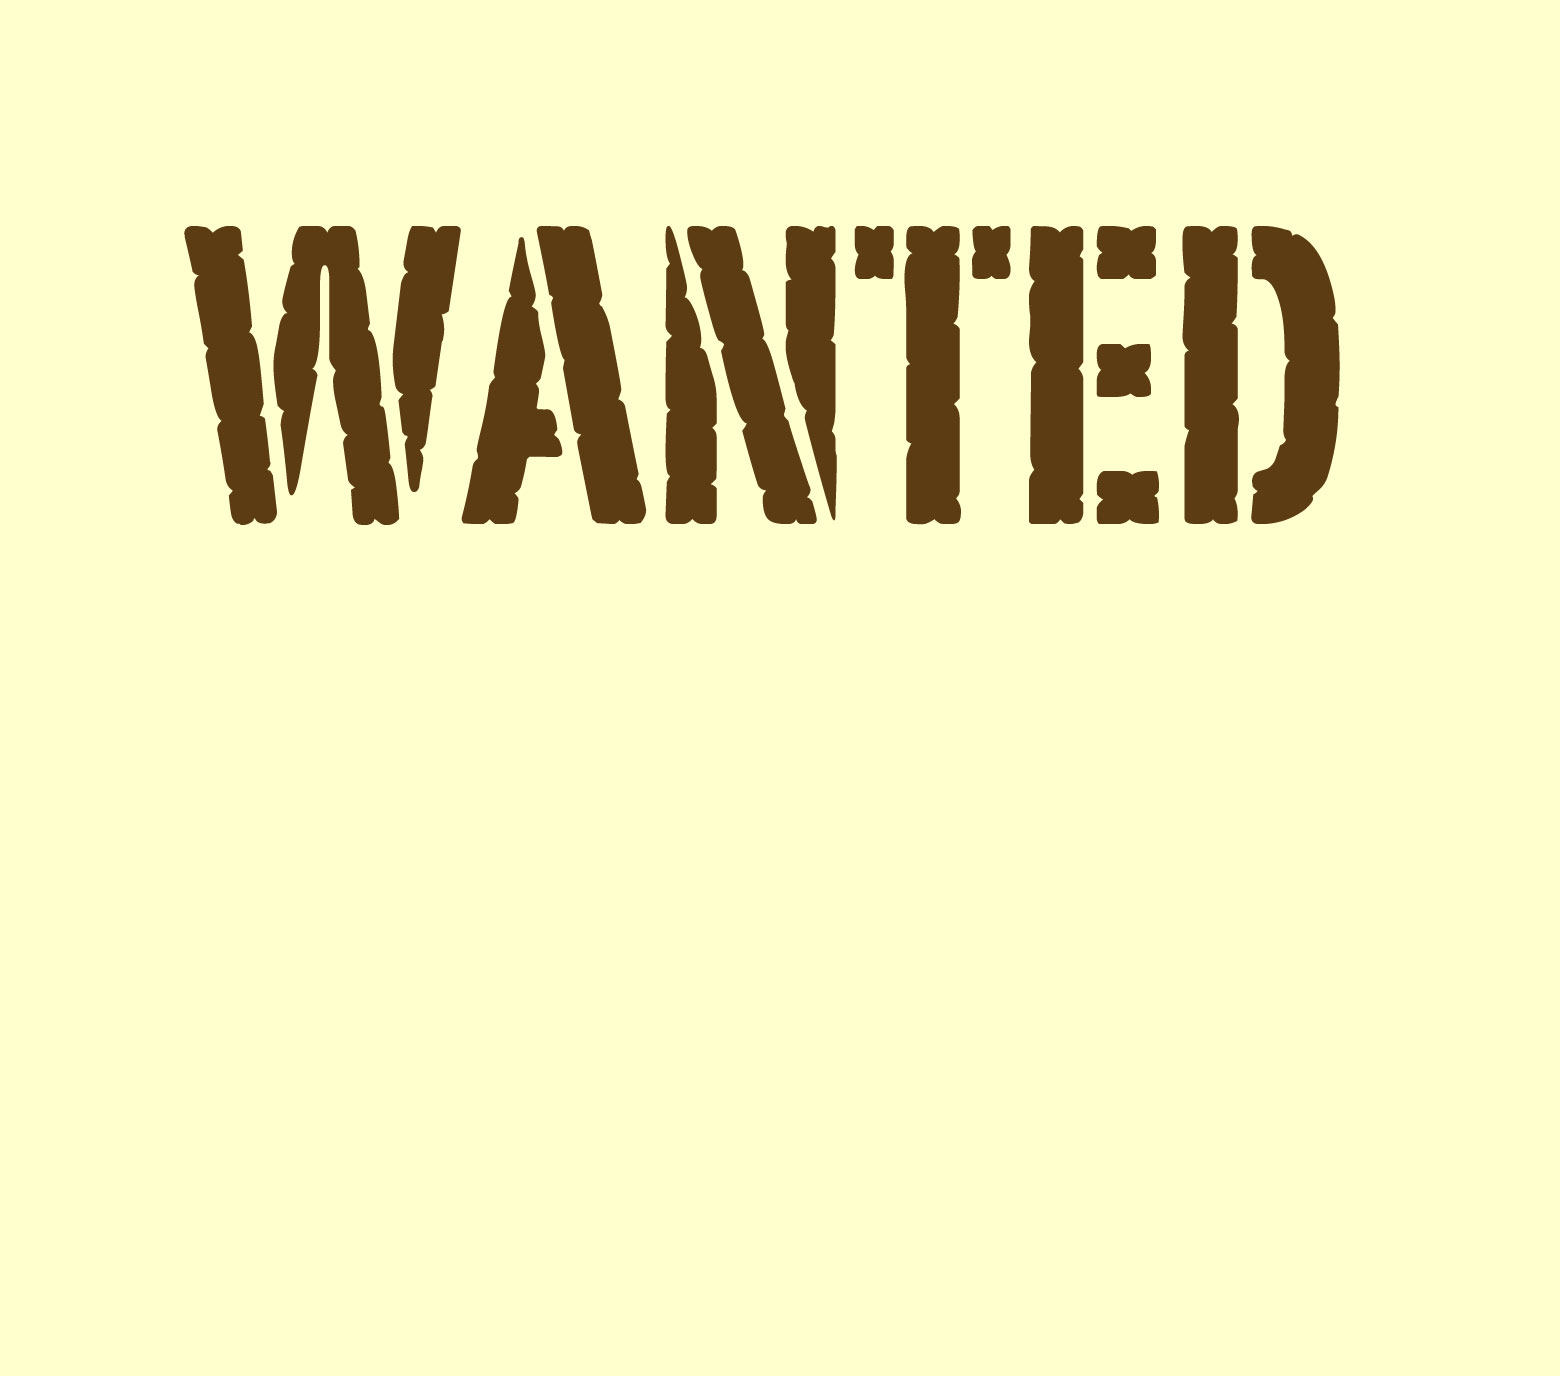 Wanted. Wanted превью. Я wanted. Фон wanted для превью. Want want china